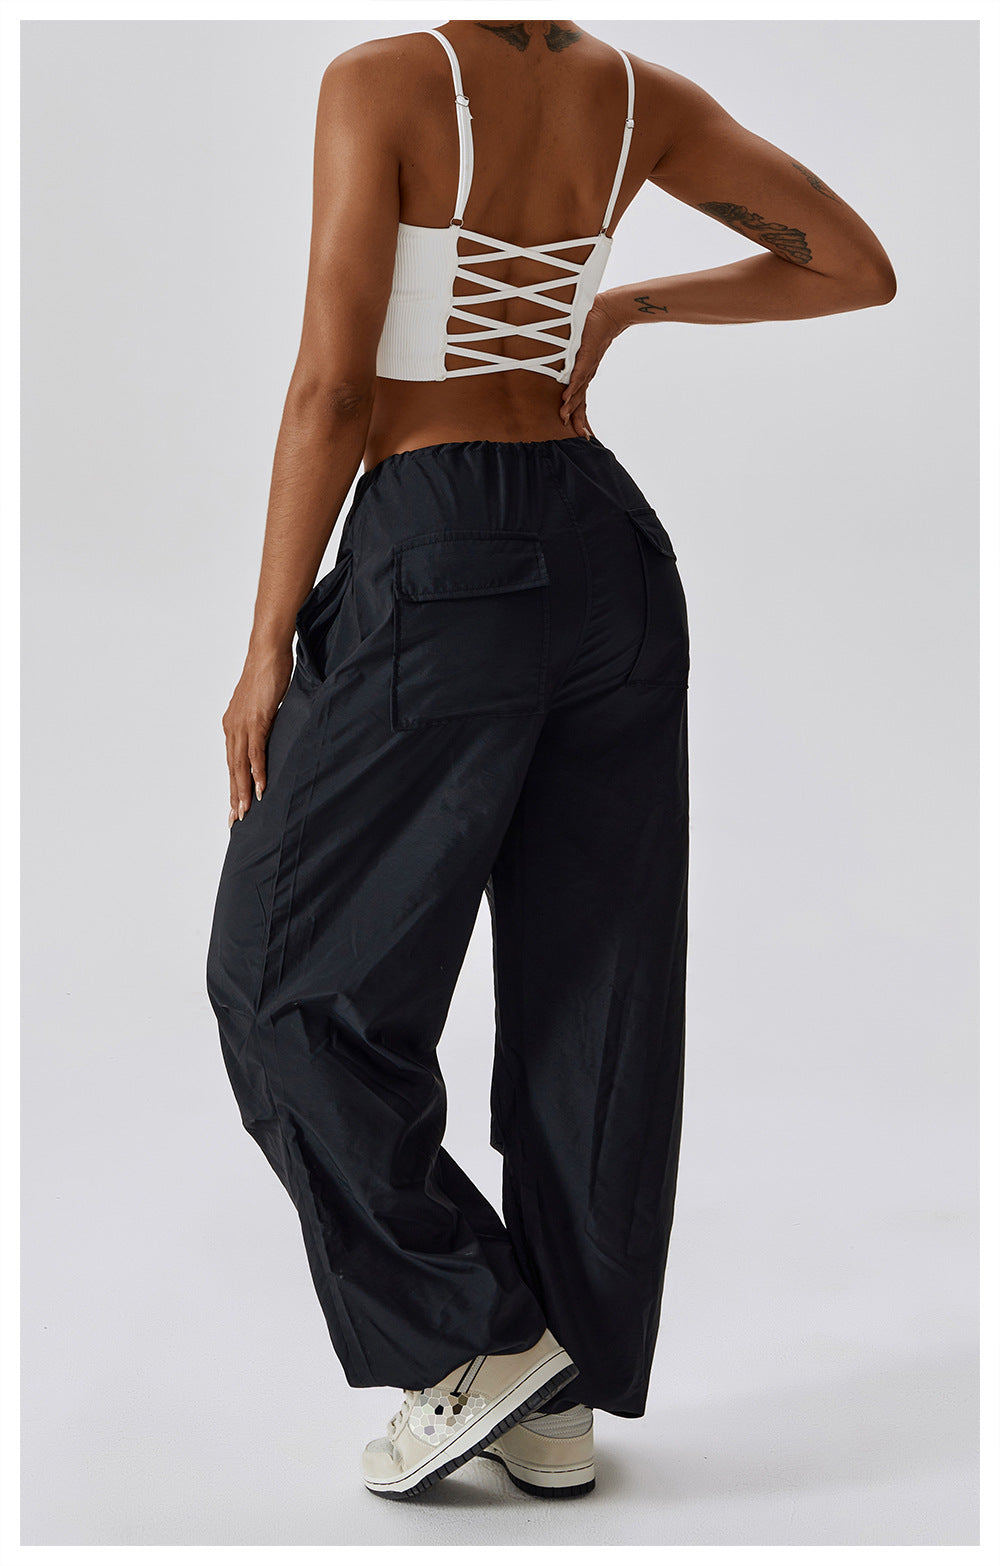 Summer high waist quick-drying sports pants women's legged pants American style loose straight casual pocket overalls women 8212